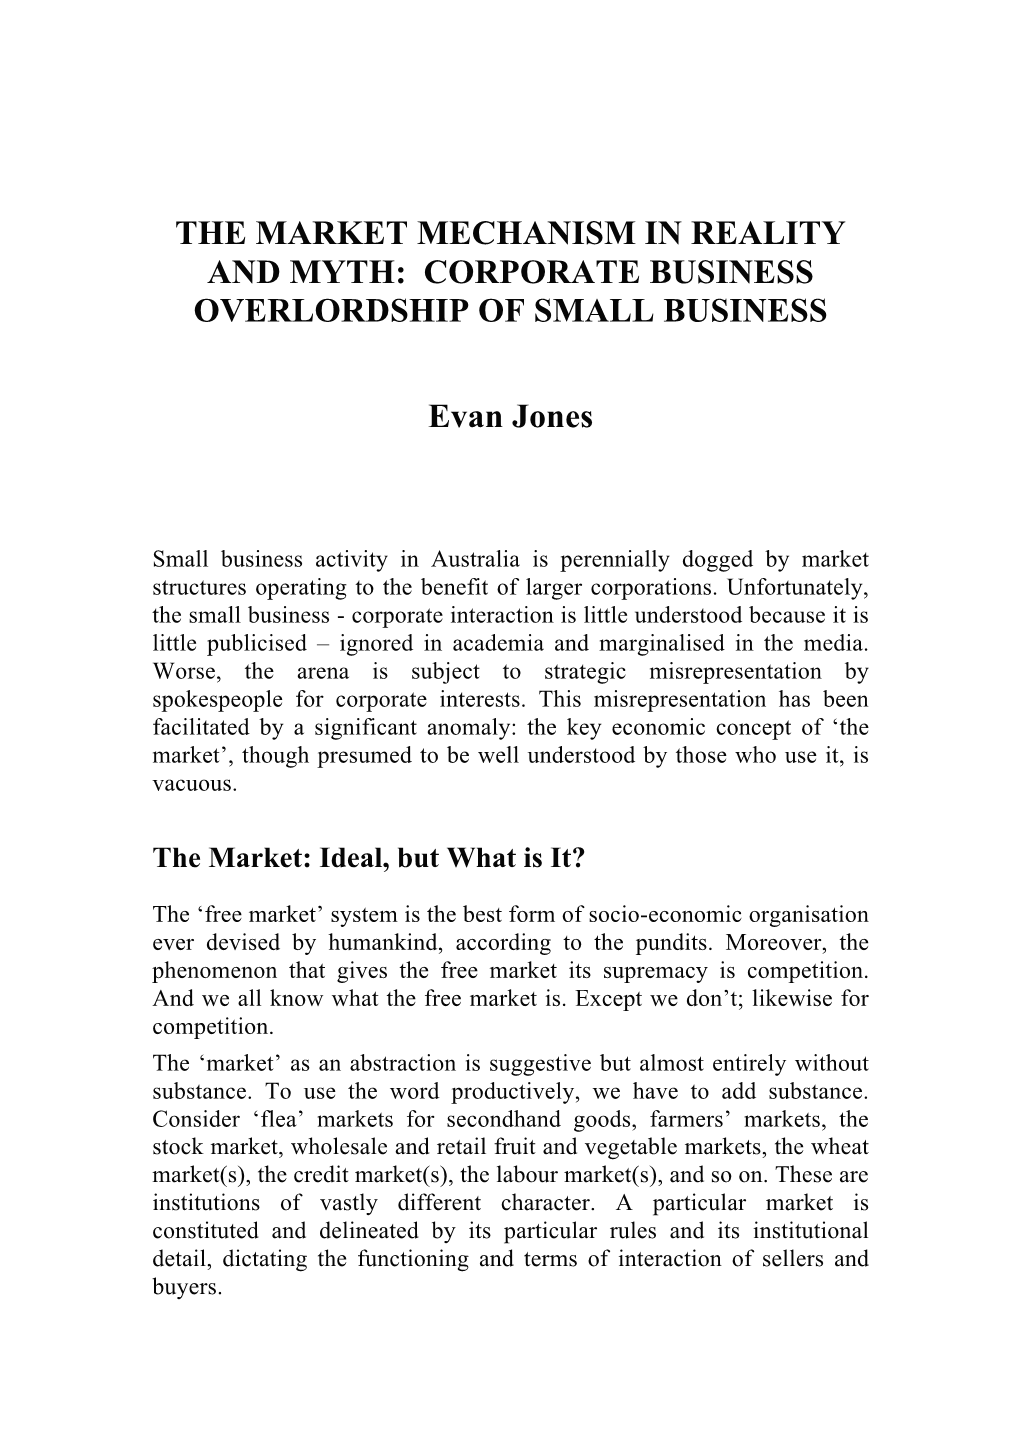 The Market Mechanism in Reality and Myth Corporate Business